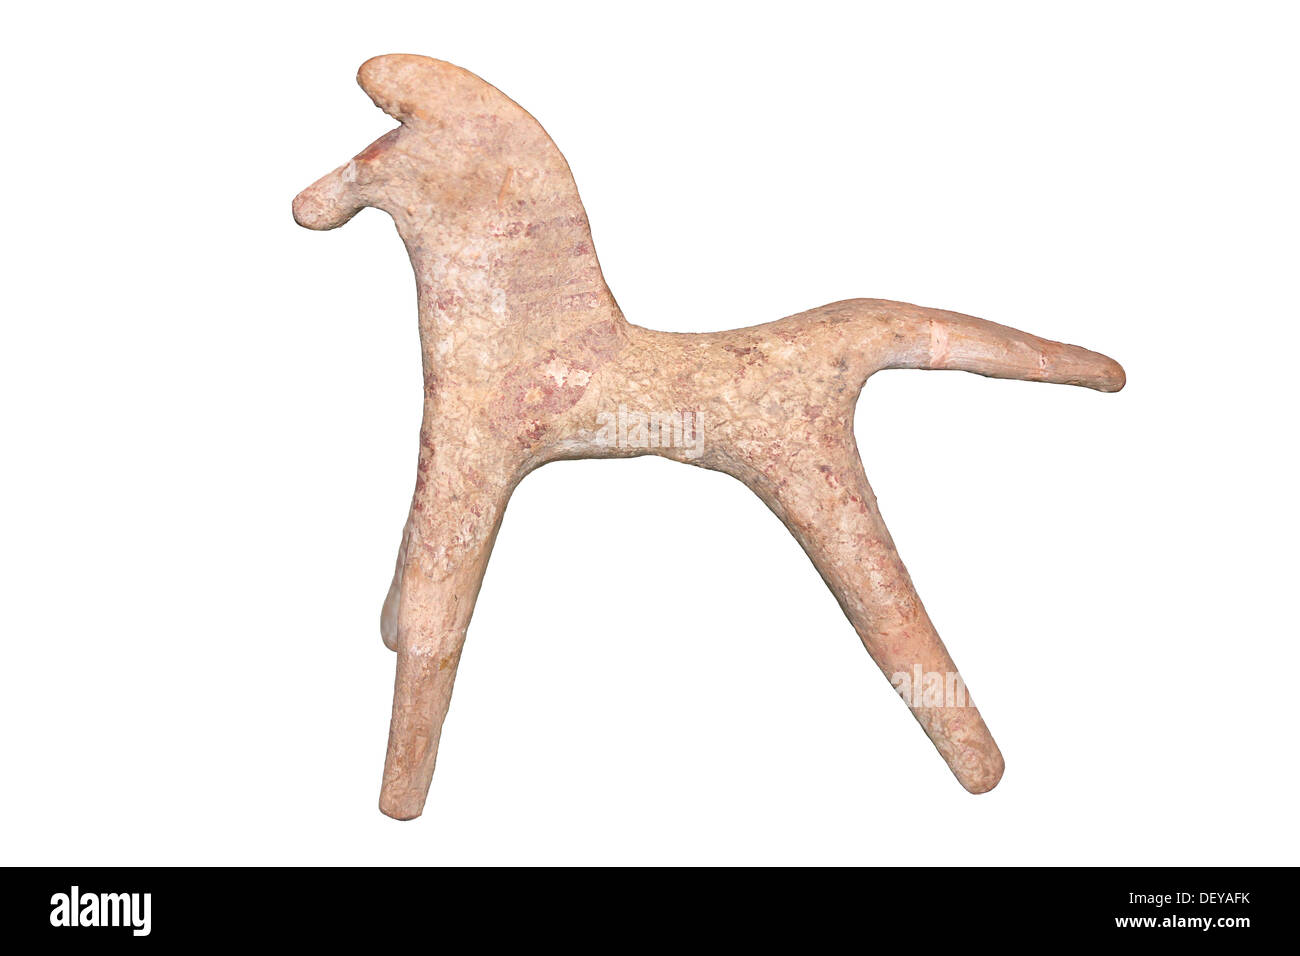 Greek Craftsmen Often Made Pottery Figurines In The Shape Of Horses For Dedication In Sanctuaries Stock Photo